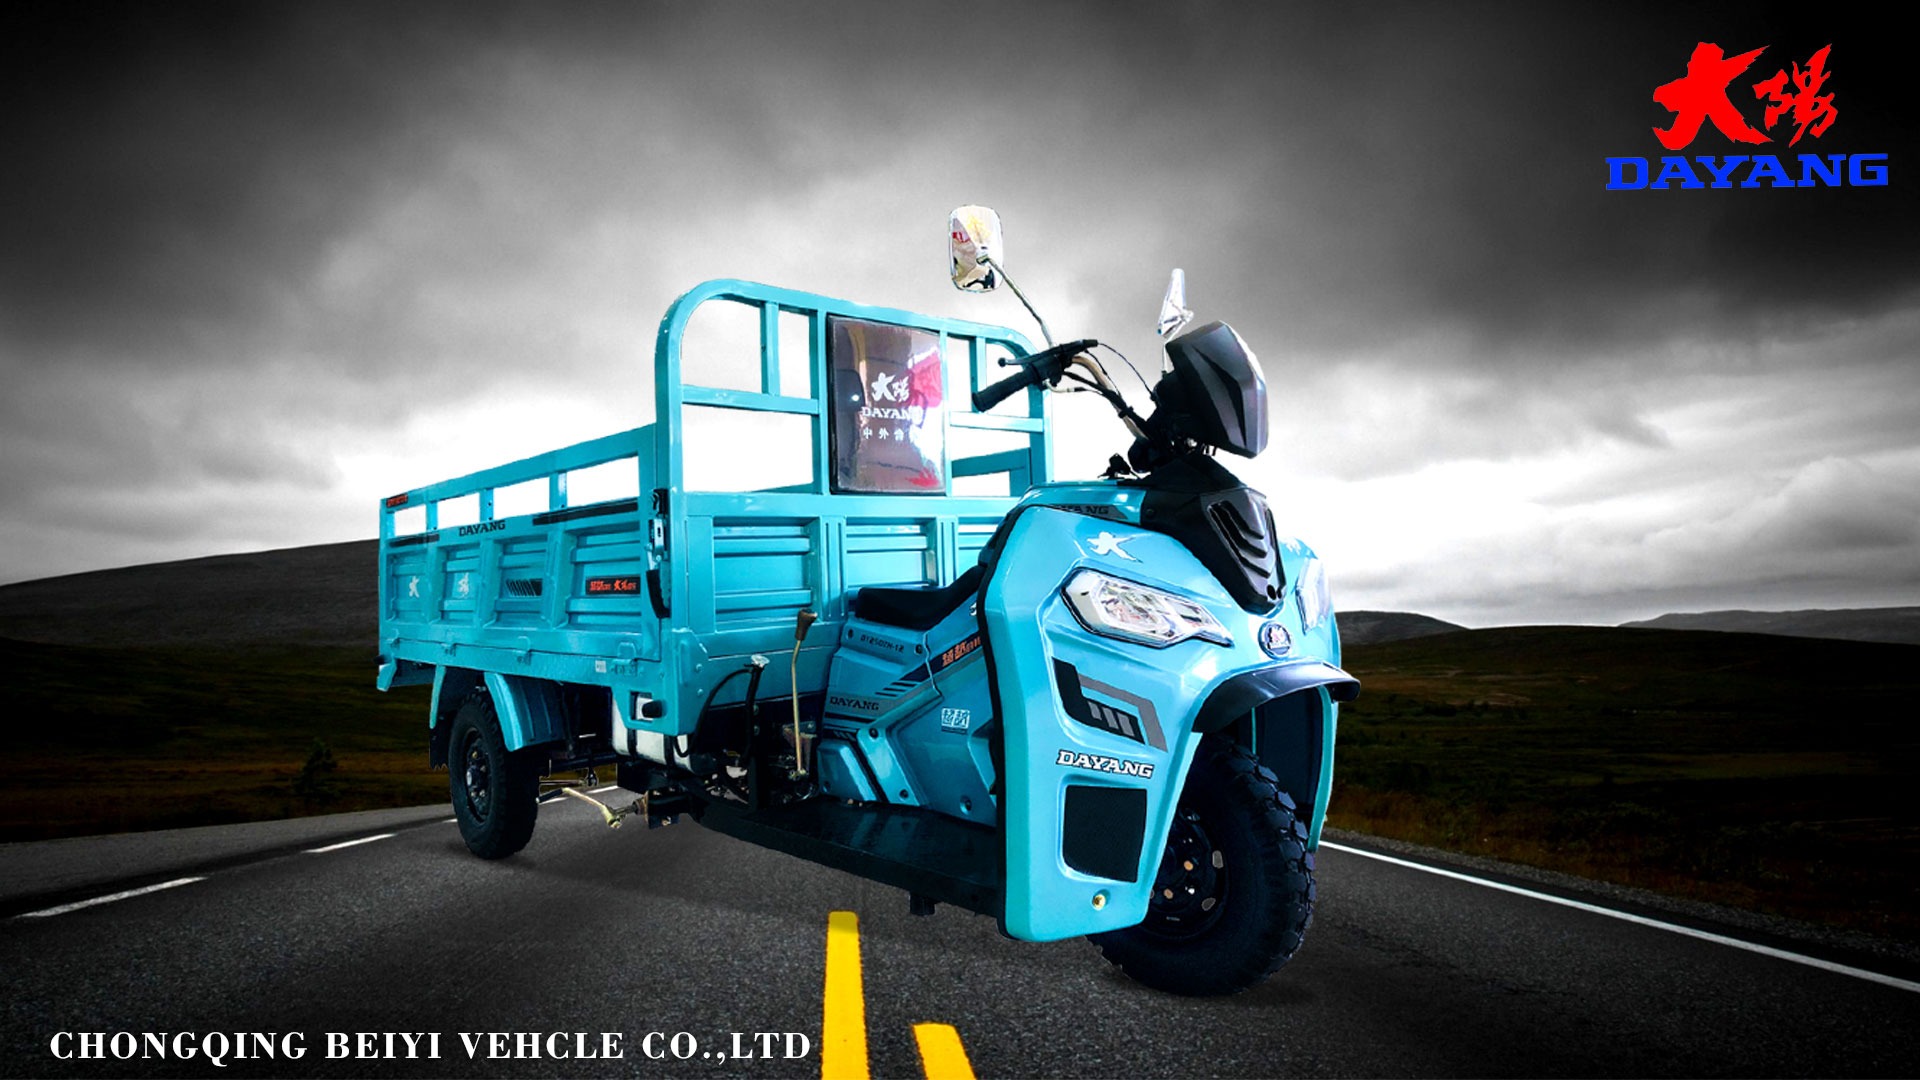 M1A Motorized Cargo Tricycle with 200cc powerful engine